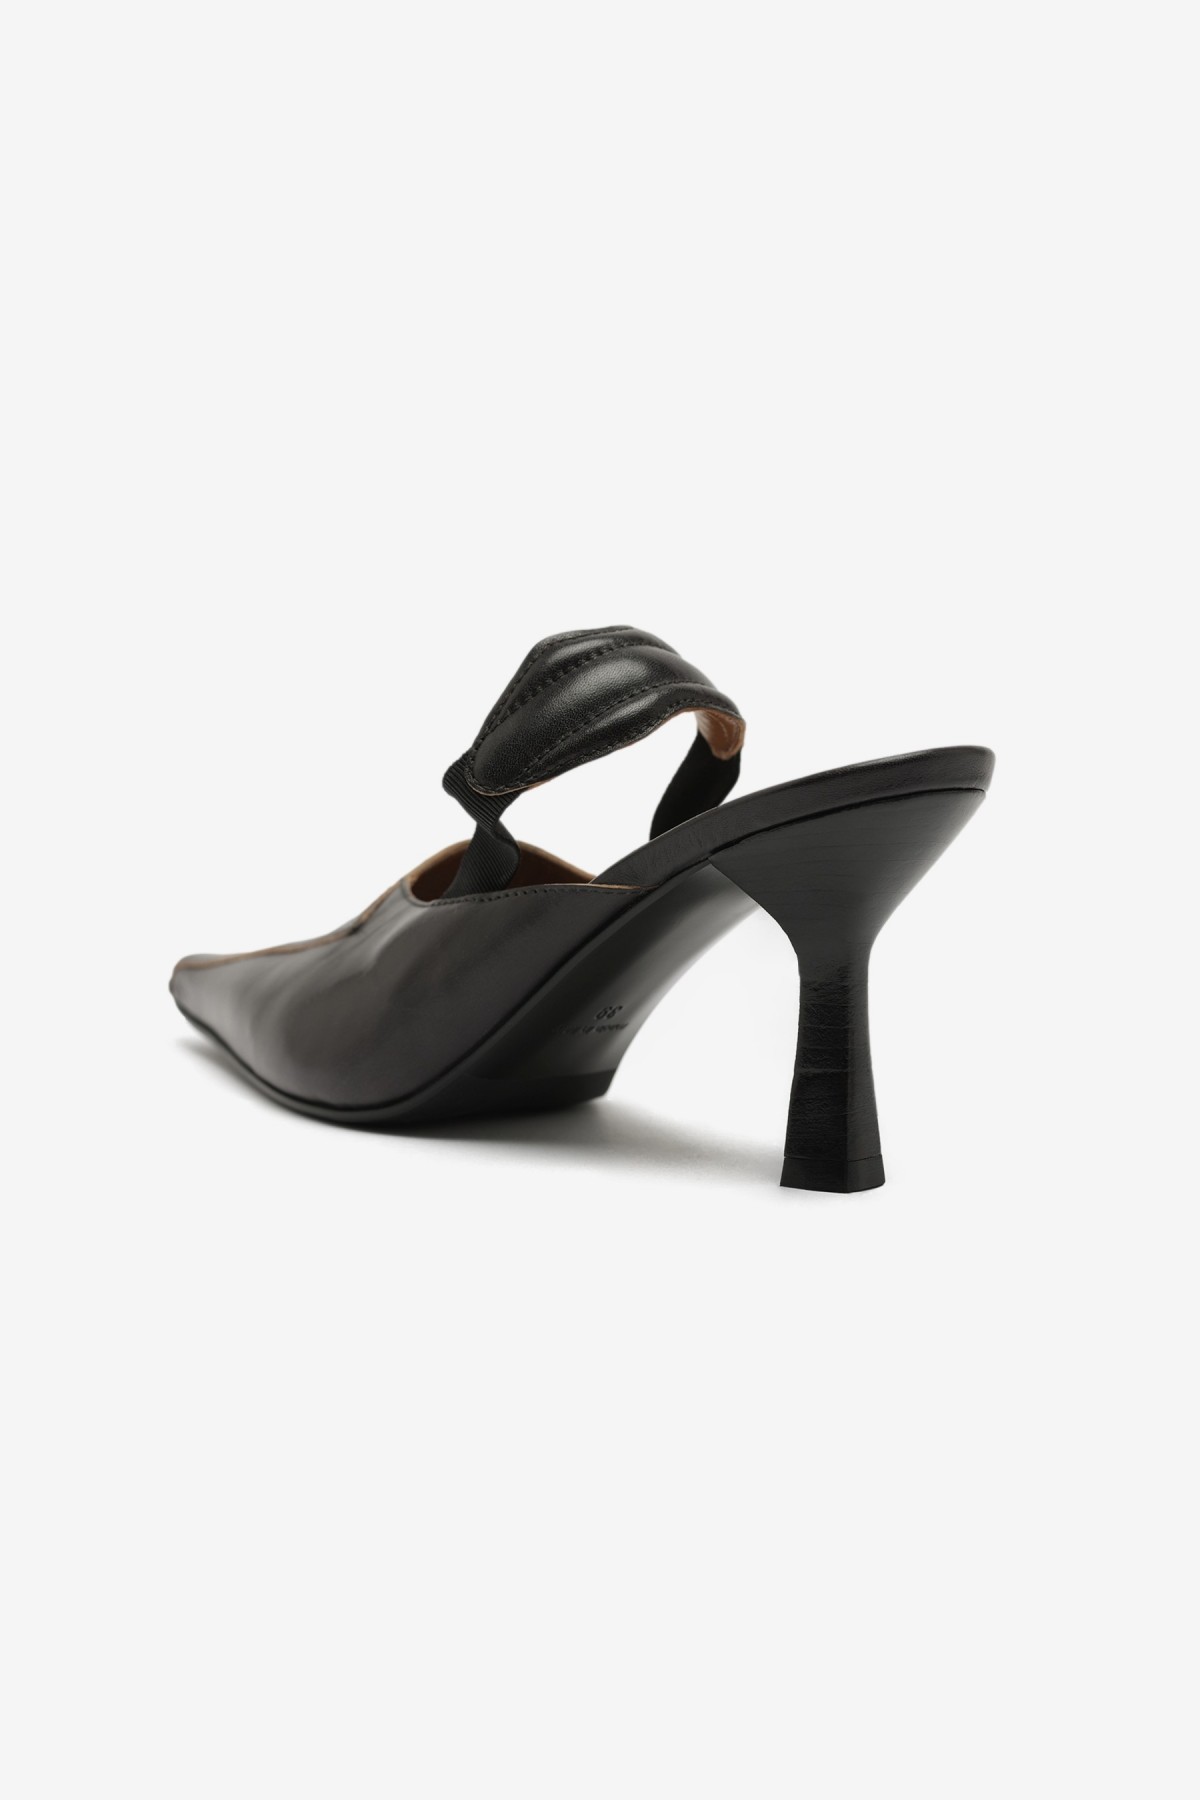 Our Legacy Envelope Heel in Top Dyed Black Leather